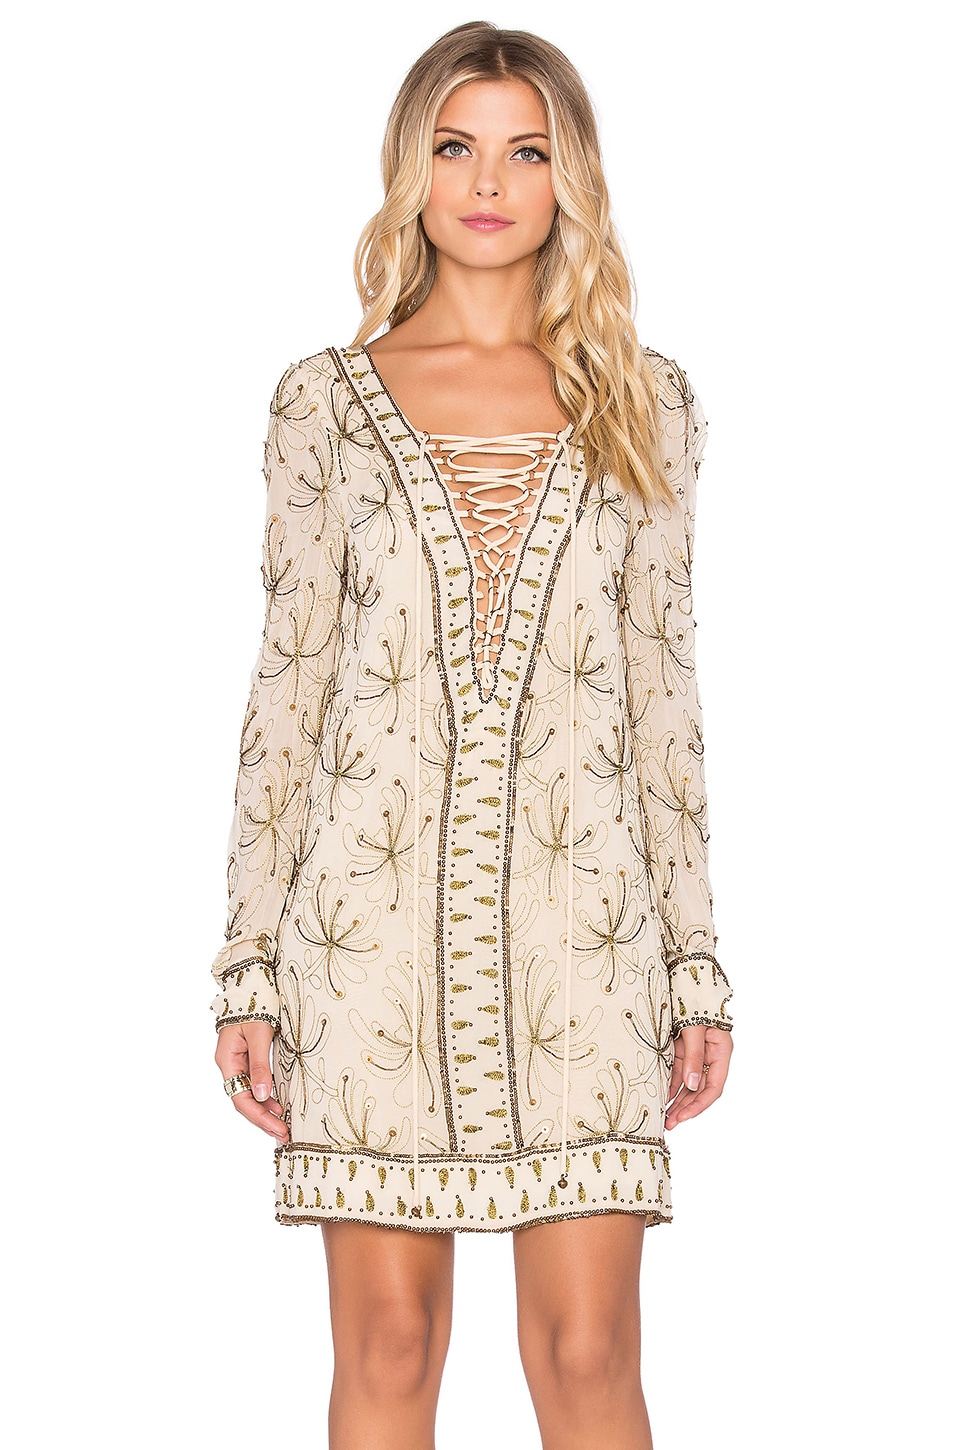 Free People Sicily Beaded Shift Dress in Ivory | REVOLVE